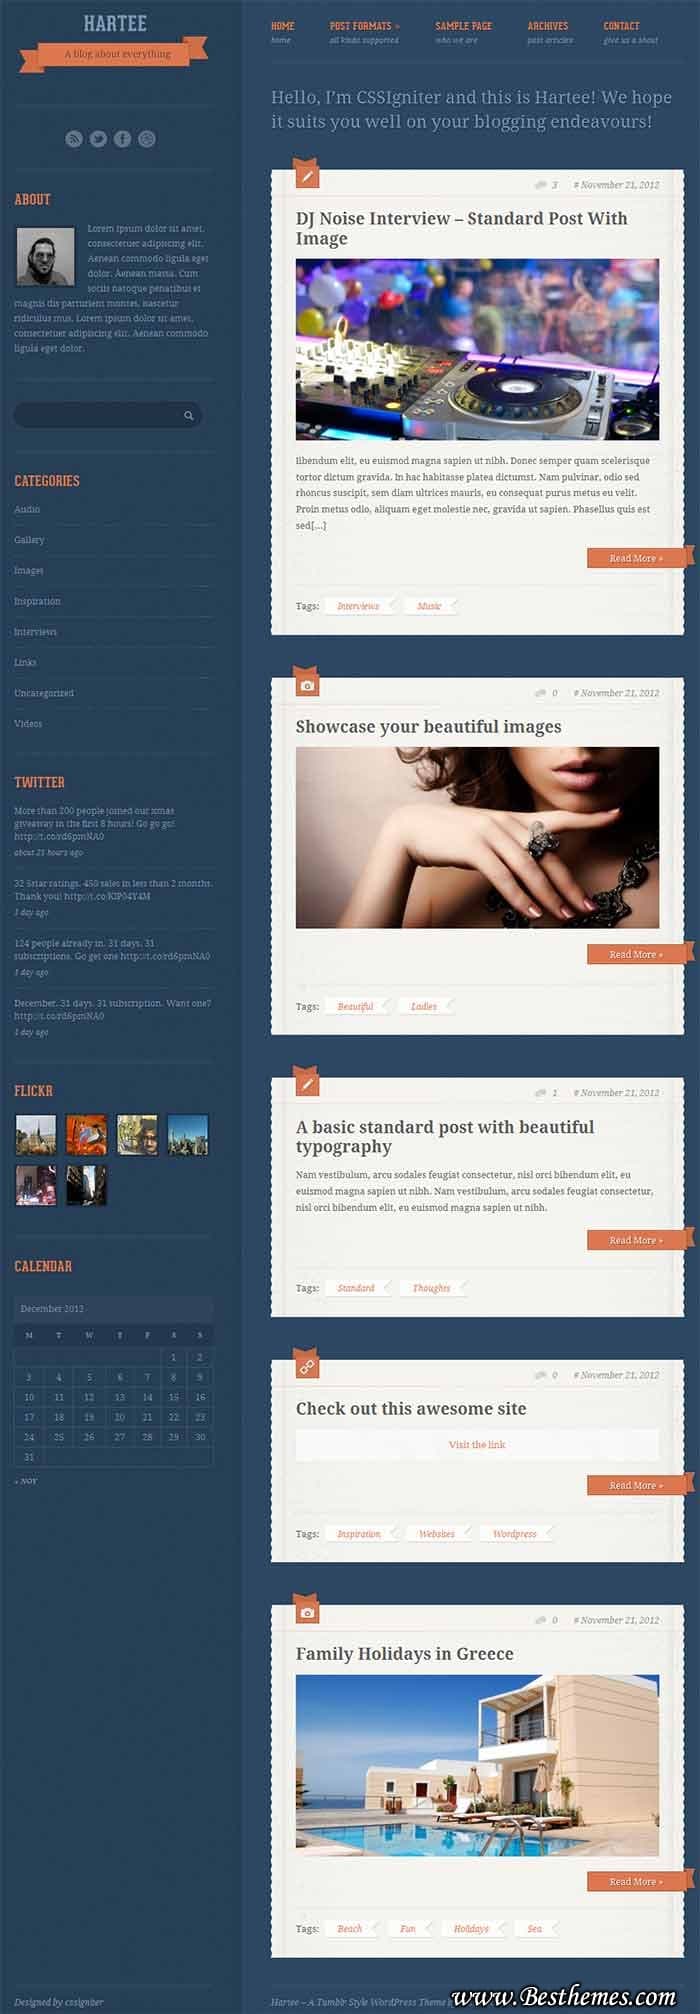 Hartee WordPress theme From CSSIginter, A tumblr style blog theme, Post format supported